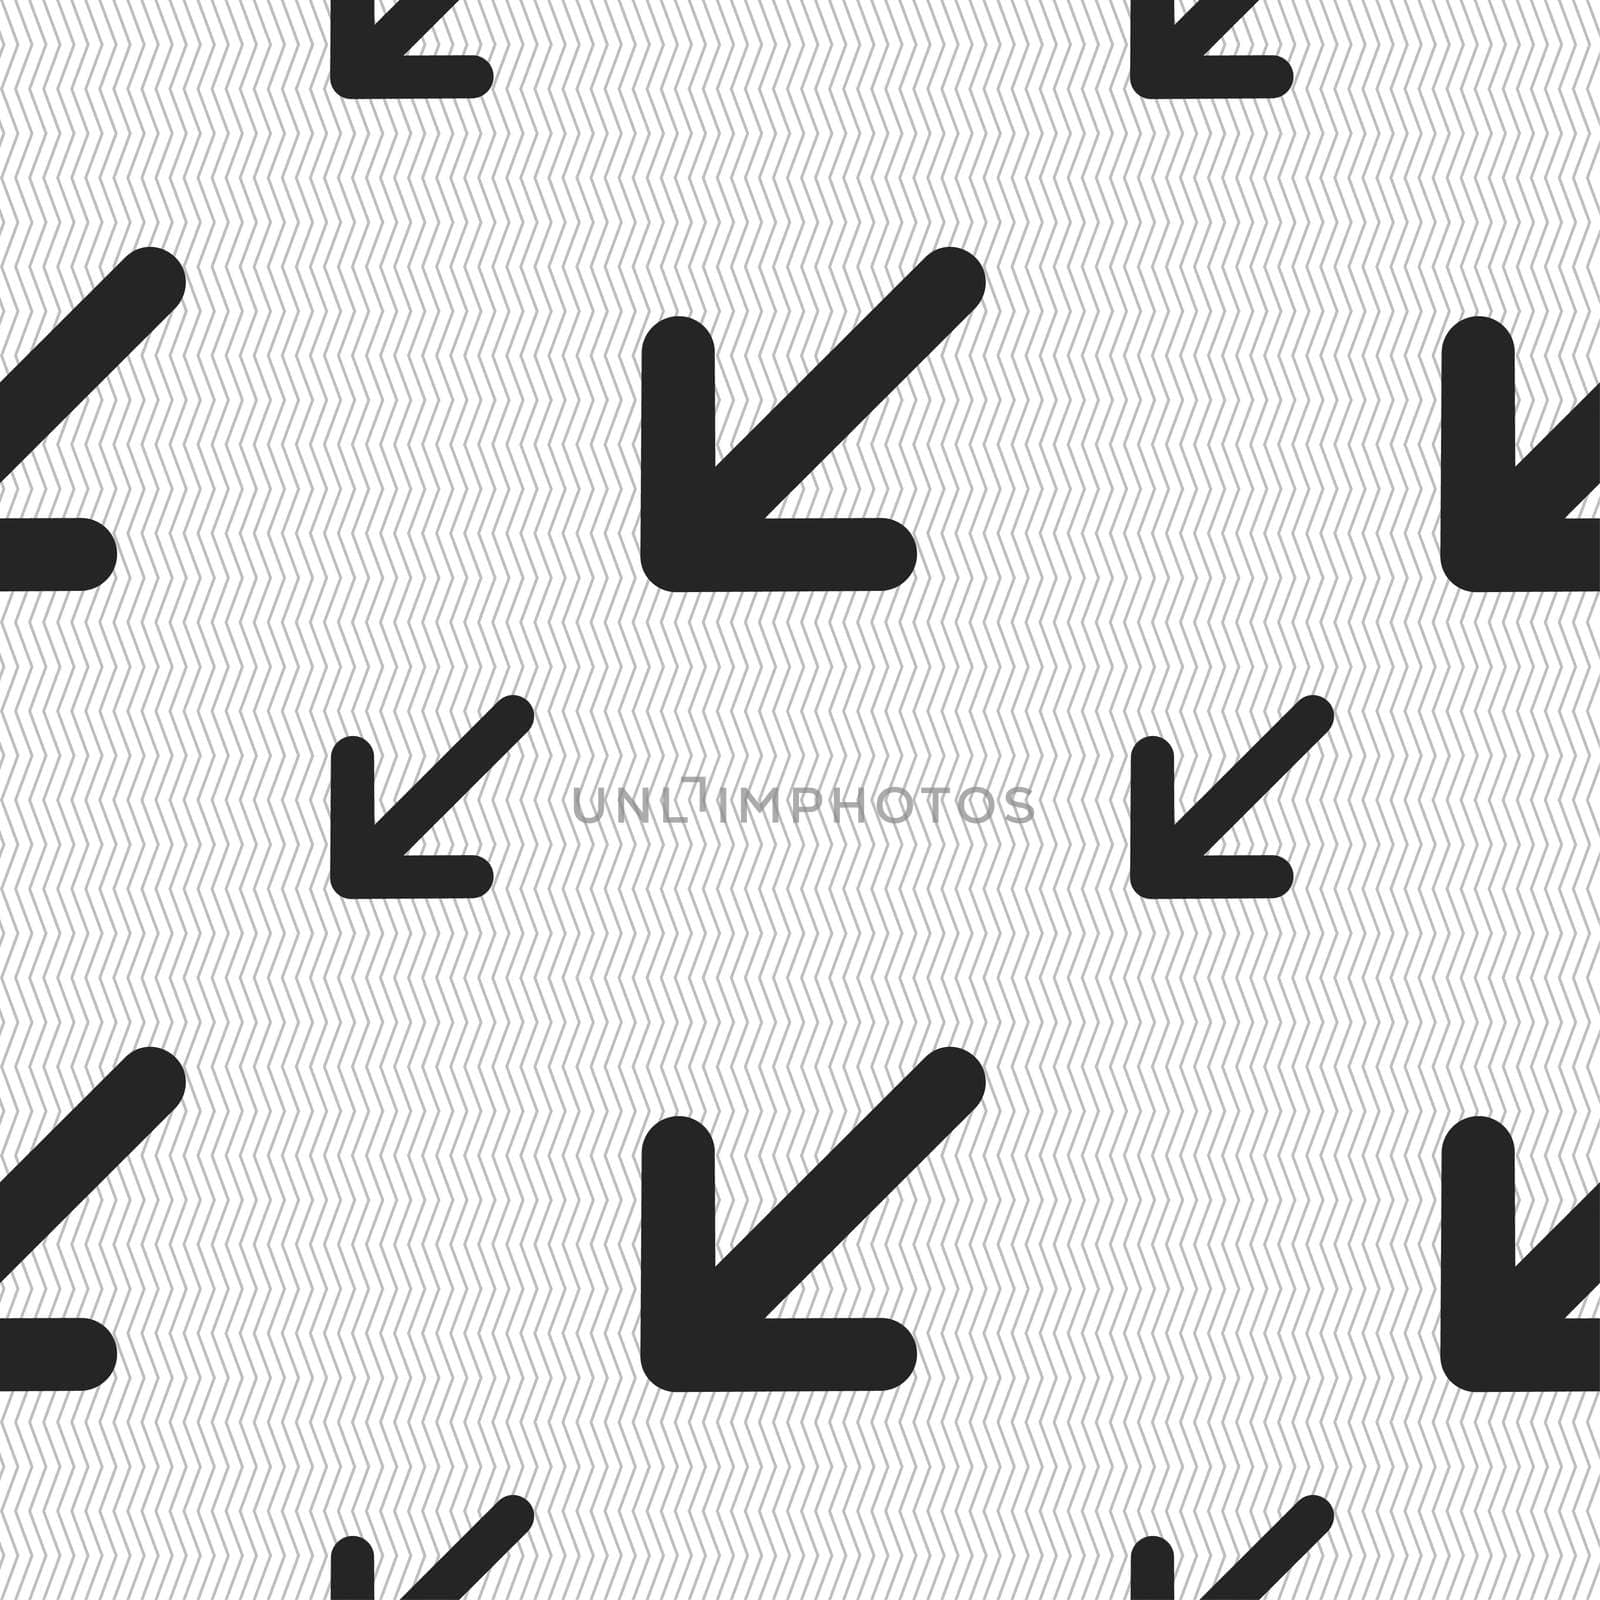 turn to full screenicon sign. Seamless pattern with geometric texture. illustration